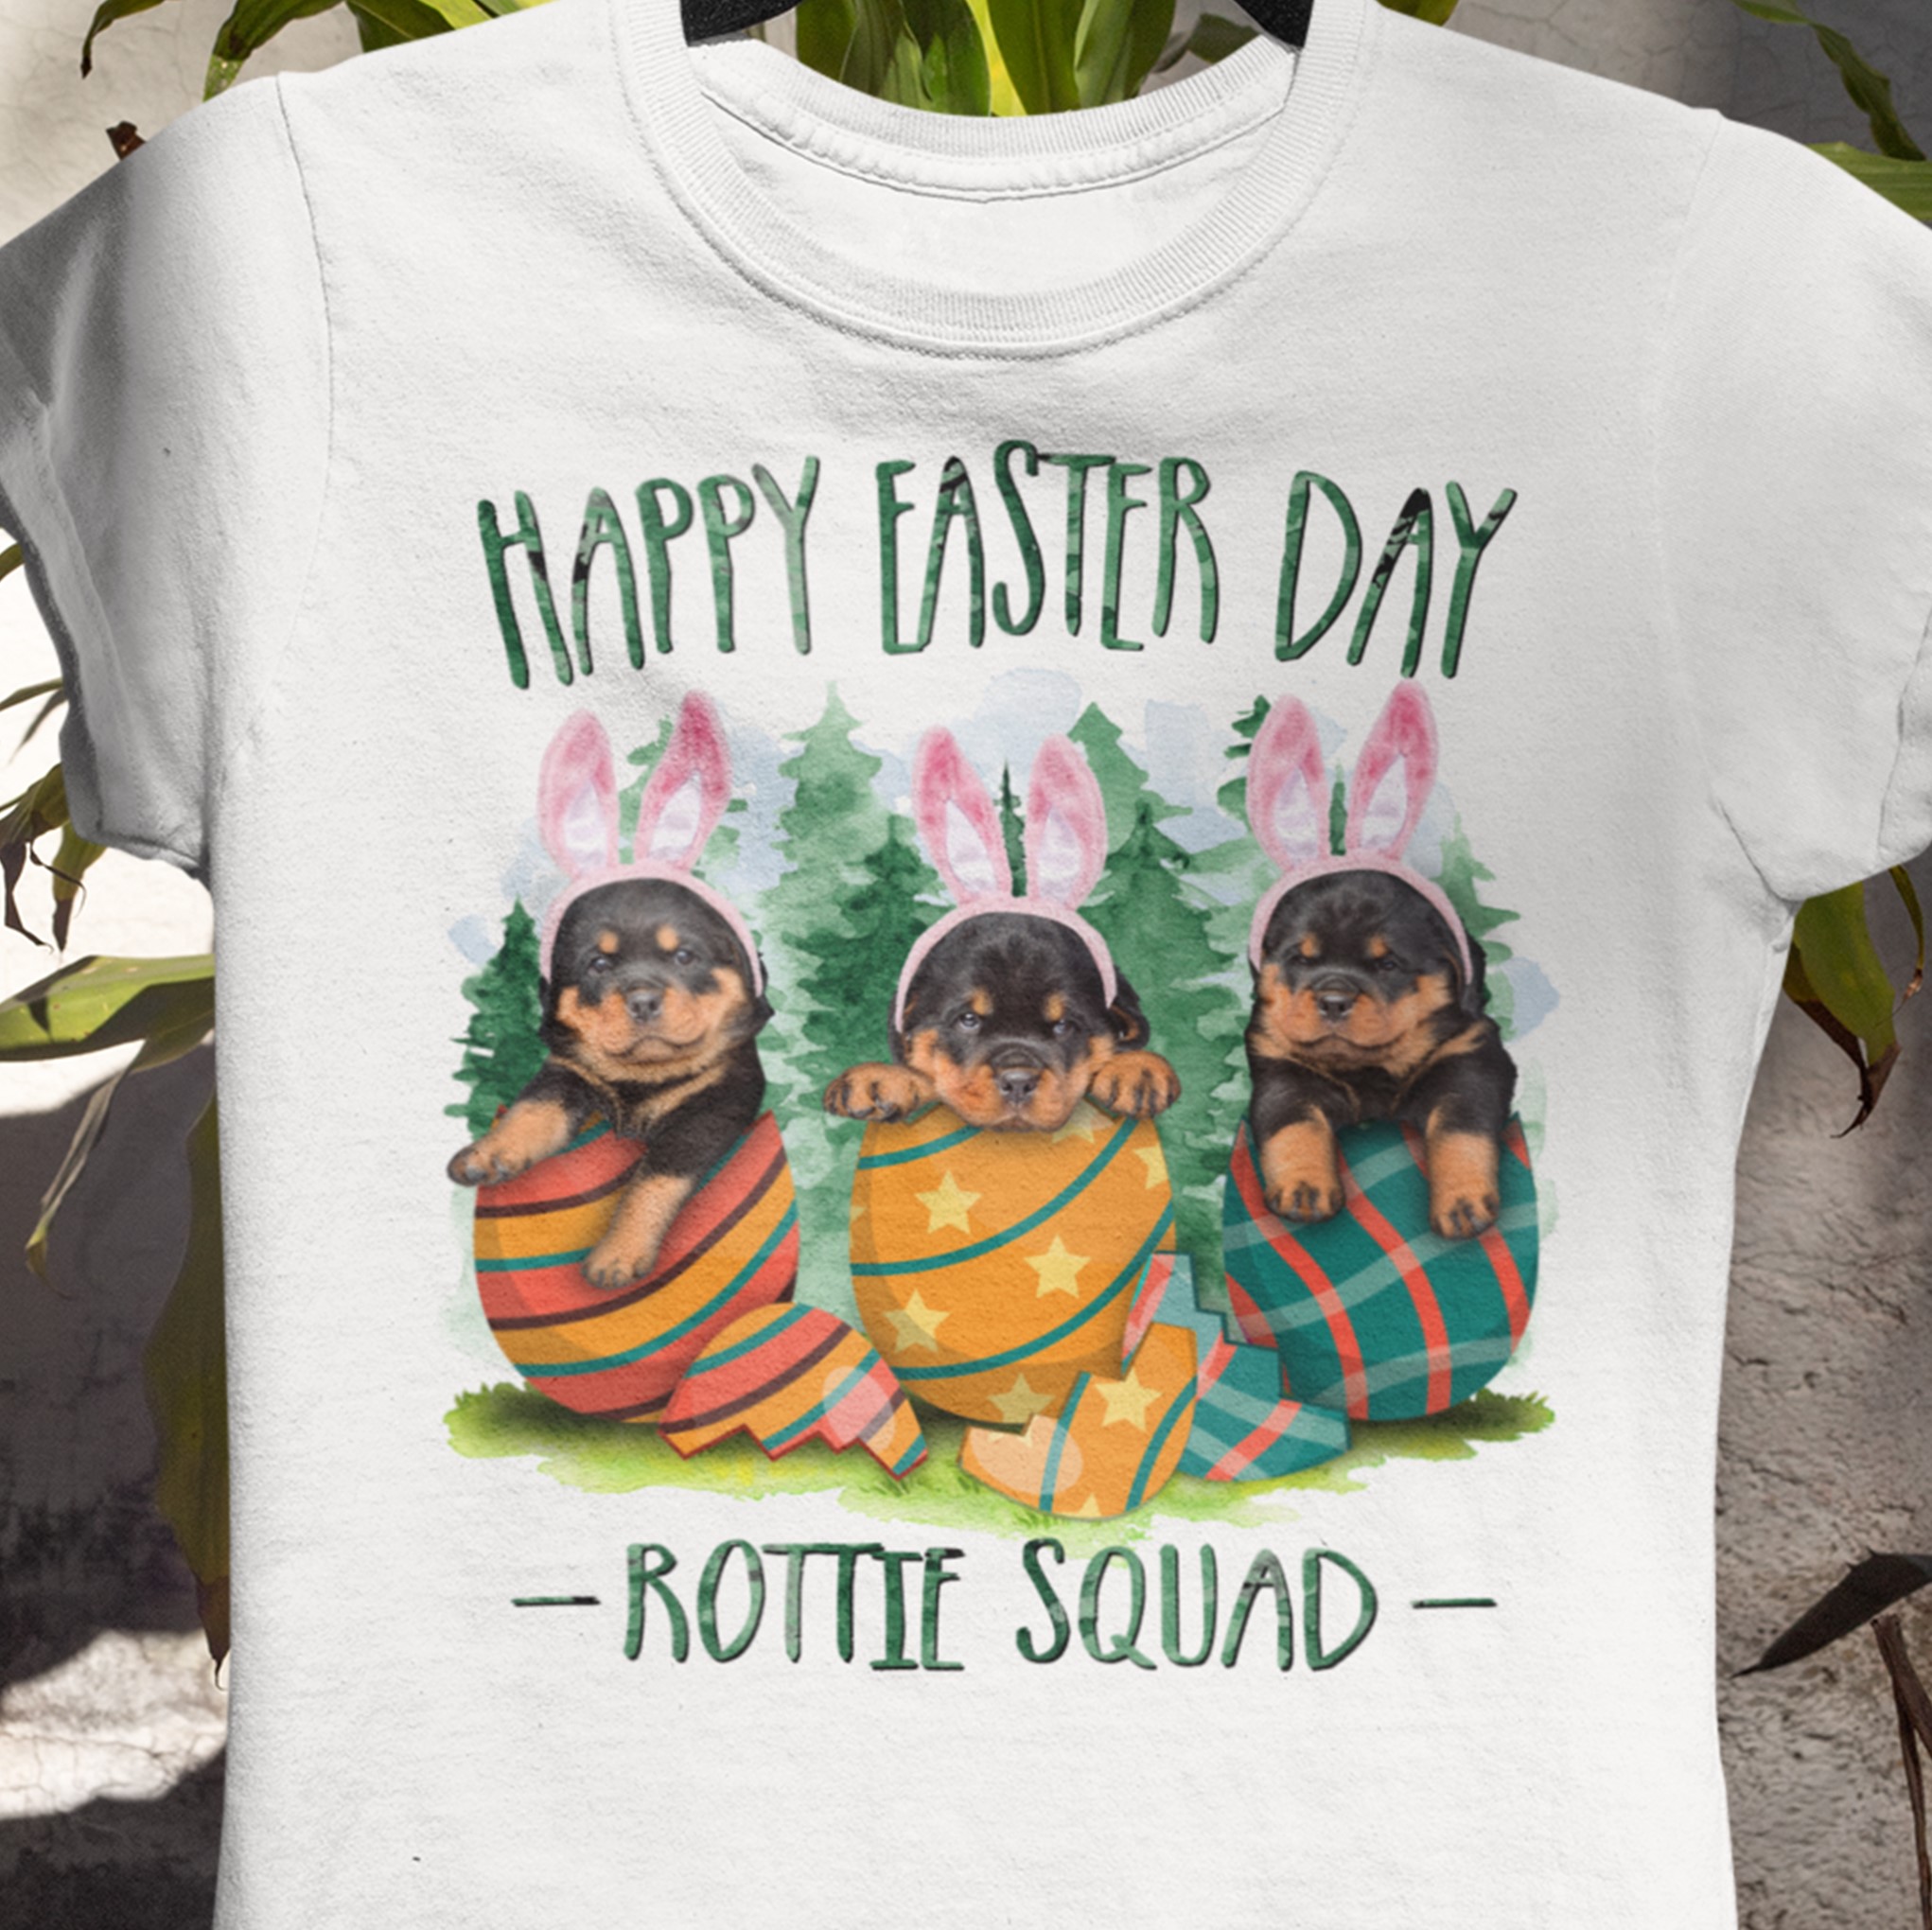 Happy easter day – Rottie squad